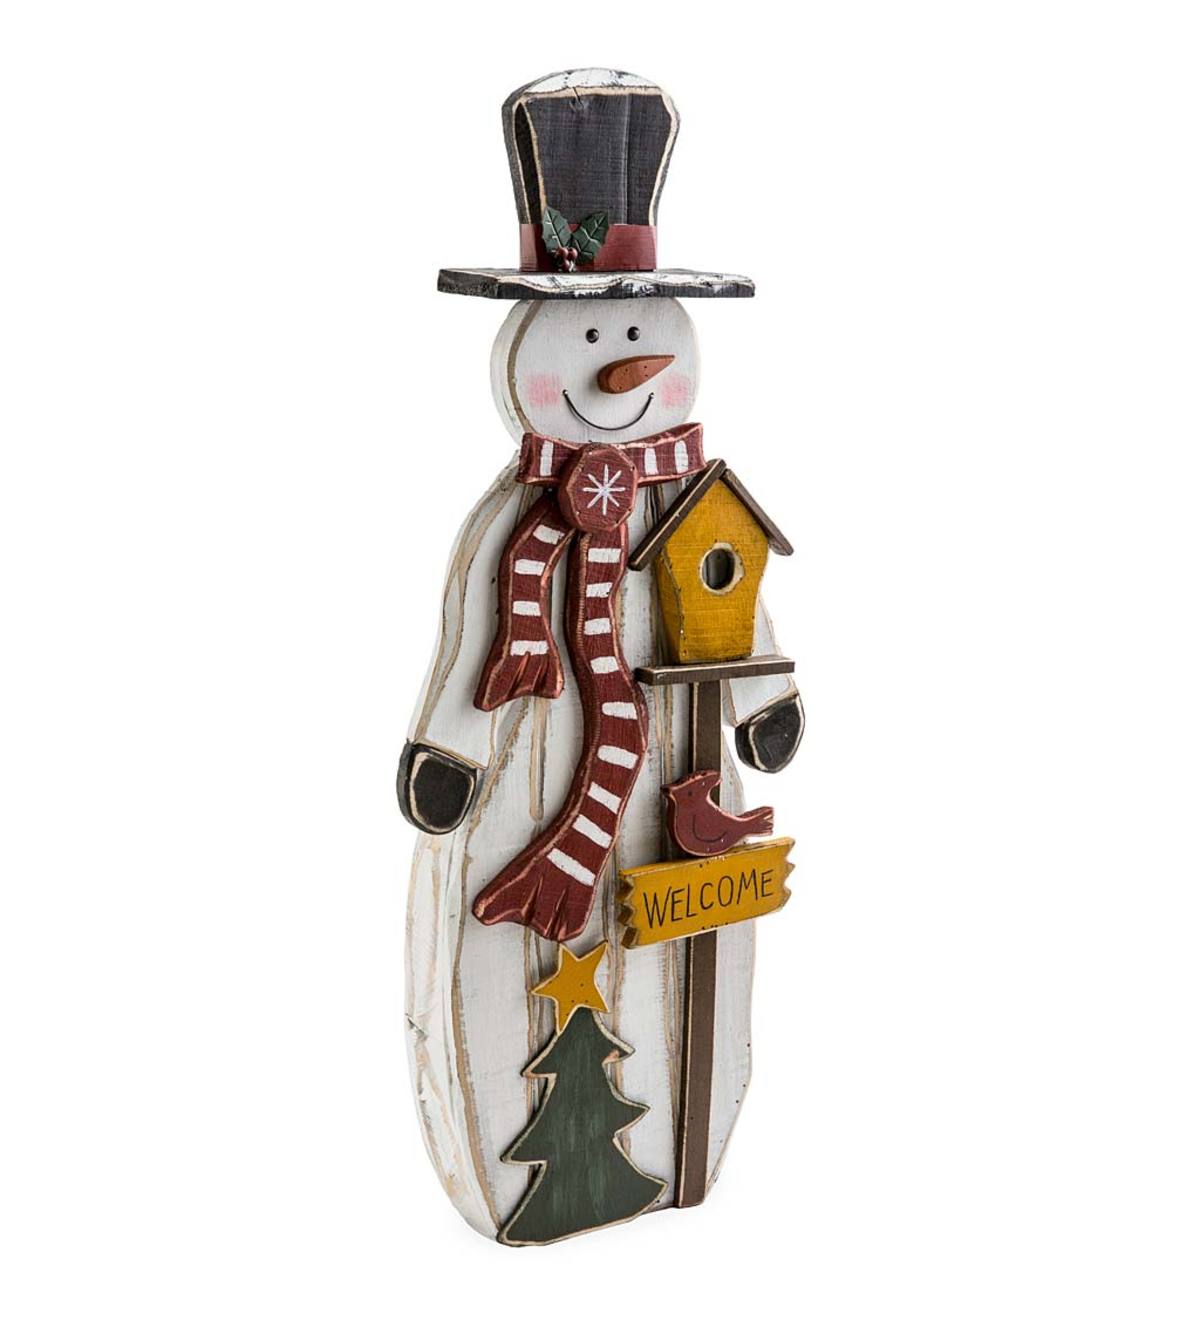 Wooden Welcome Snowman Statue | Plow & Hearth